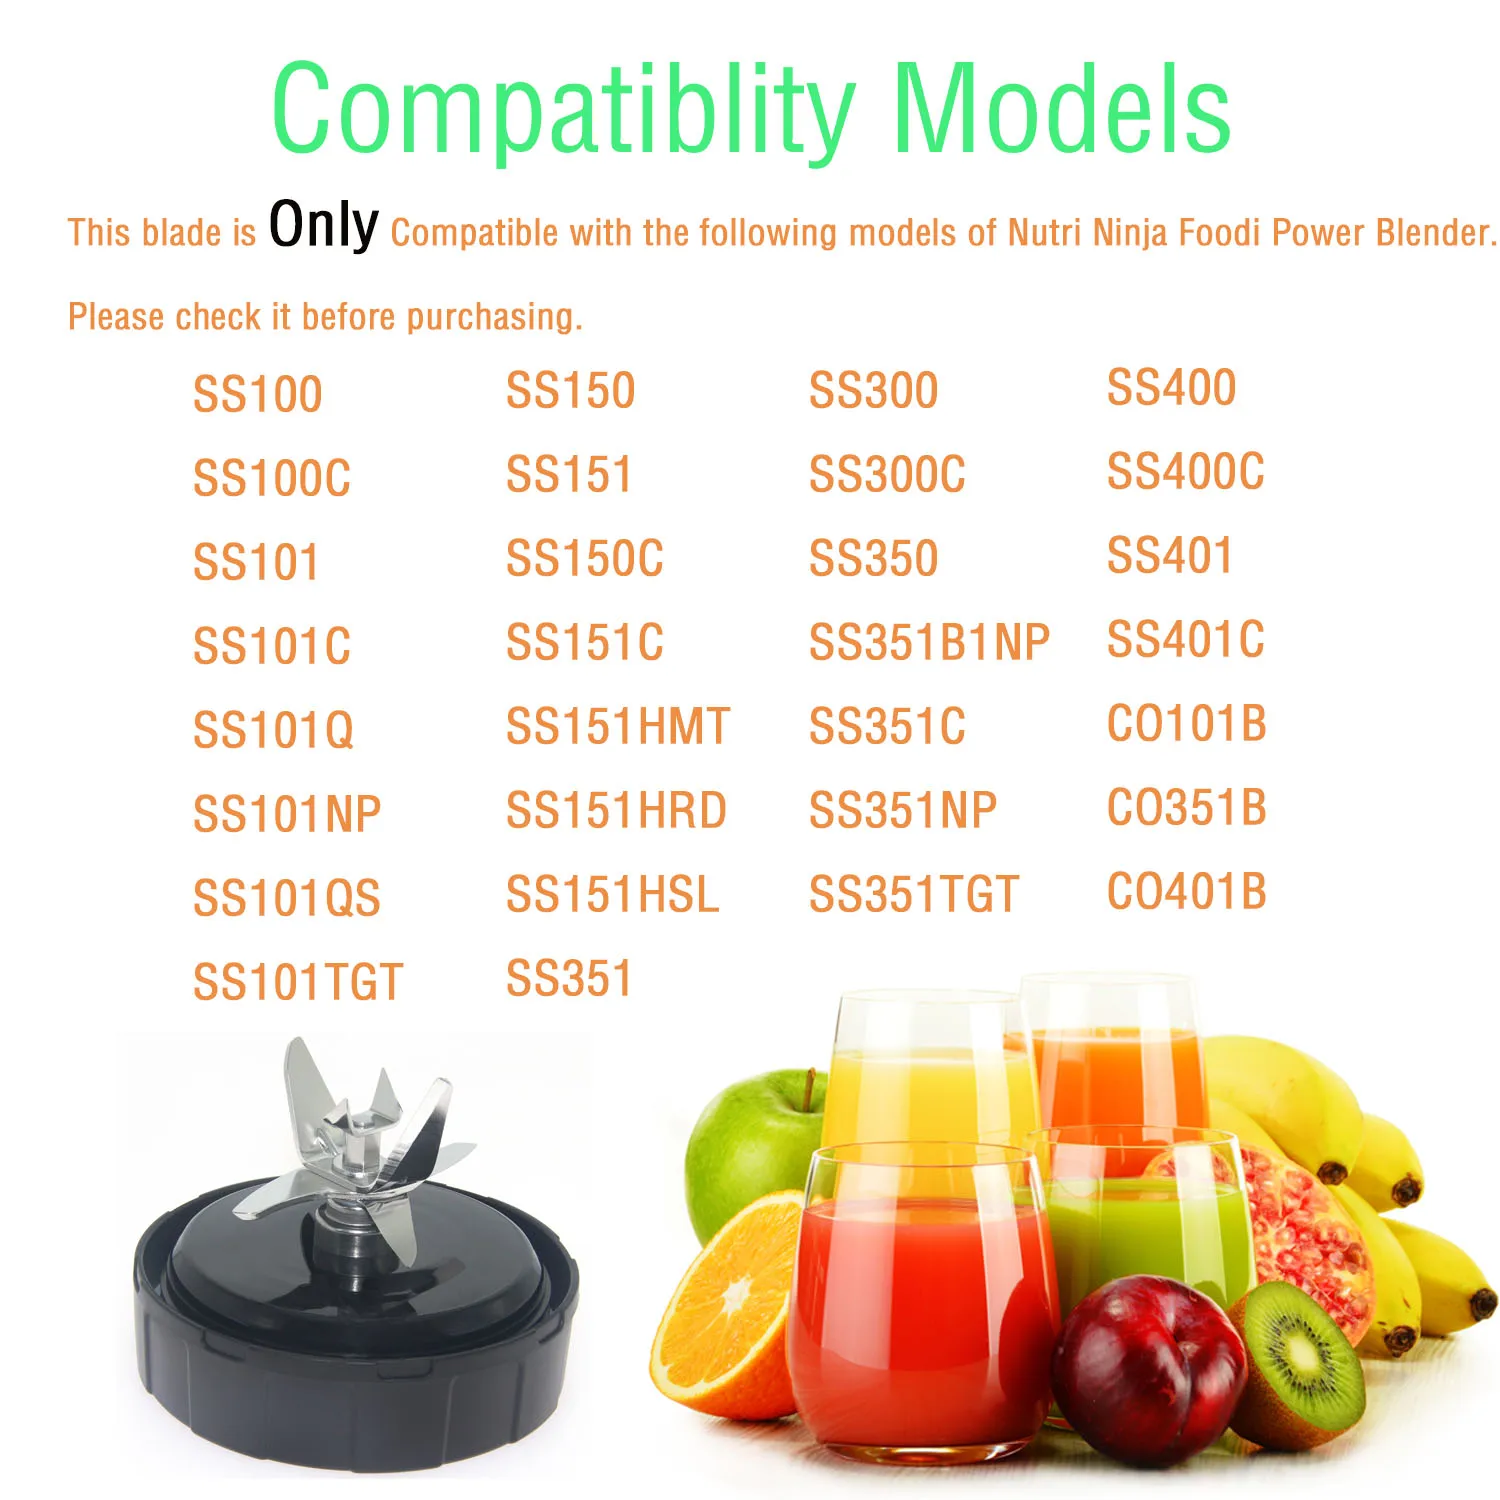 New Model Replacement Blender Blade for Ninja Accessories, Only Compatible with Nutri Ninja Foodi Power Blender Ss300, Ss300c, SS351, Ss351c, SS351TGT